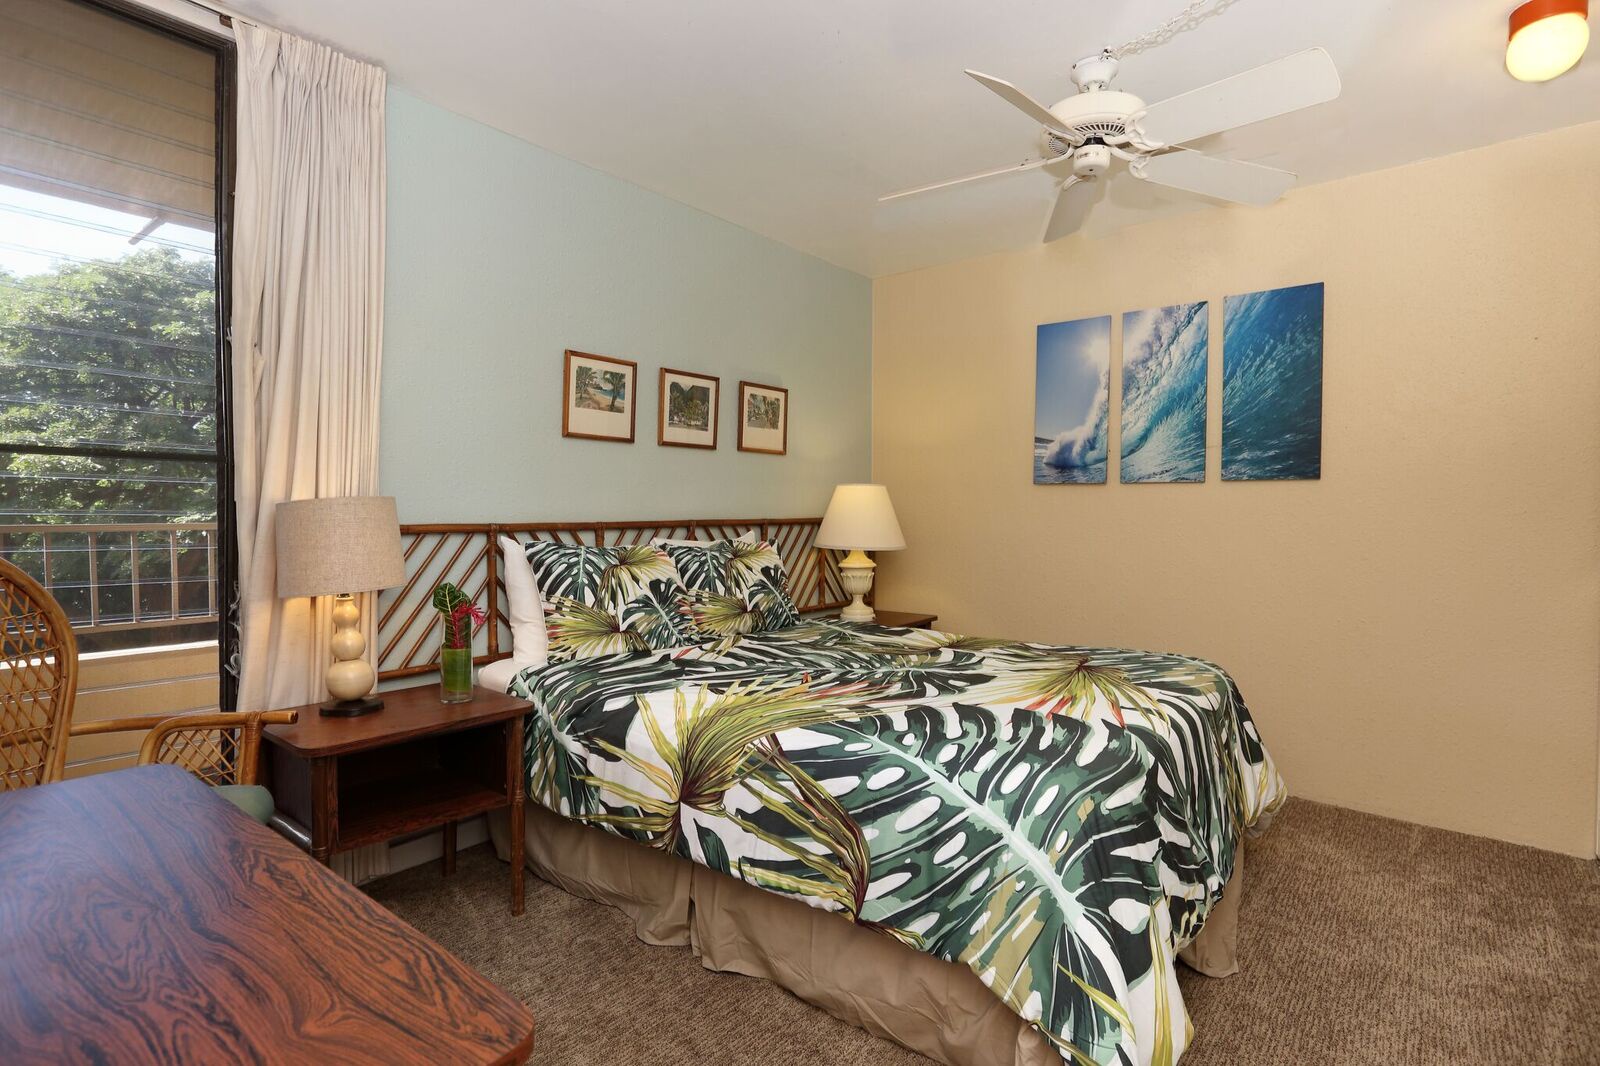 Lahaina Vacation Rentals, Paki Maui 313 - Queen bed in a relaxed atmosphere